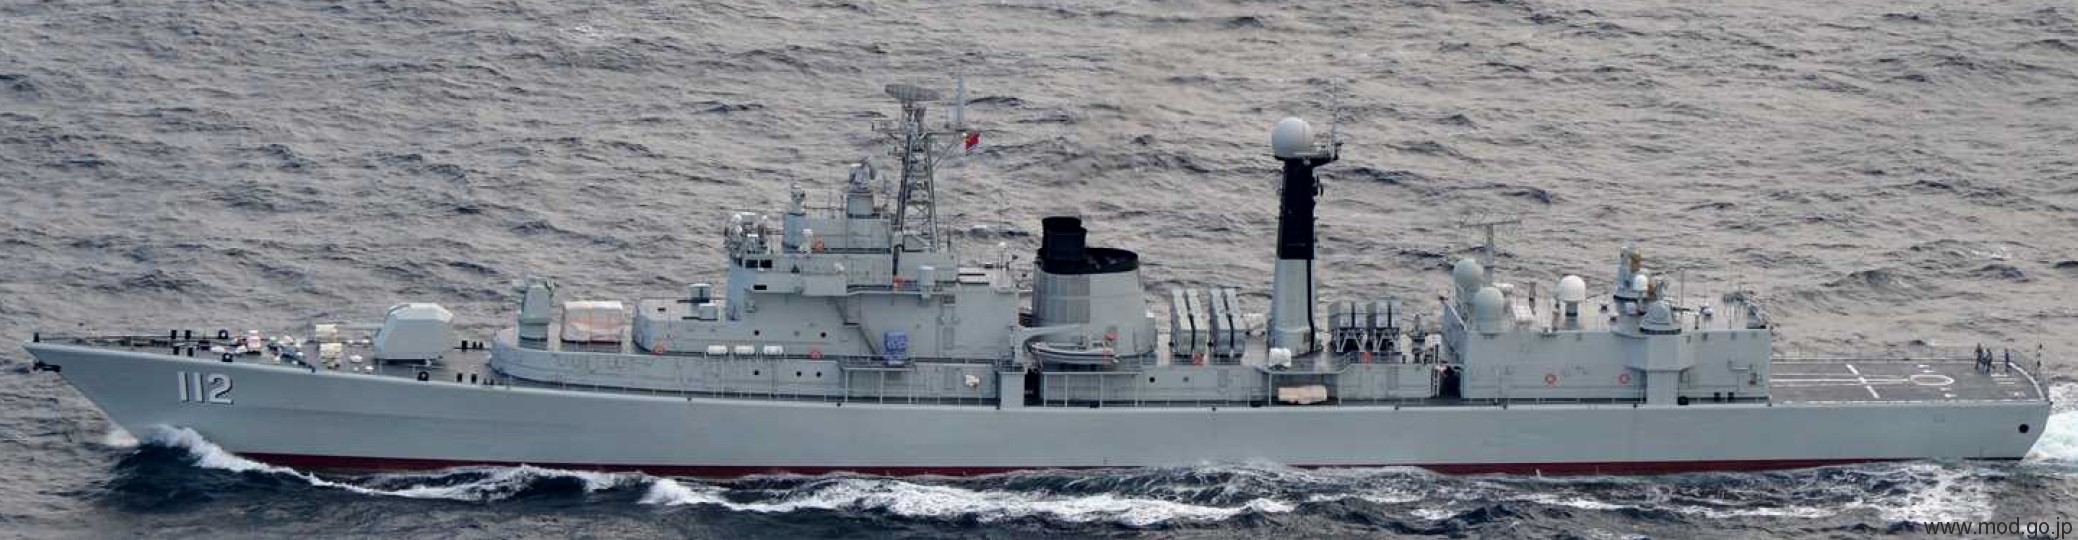 ddg-112 plans harbin type 052 luhu class guided missile destroyer china peoples liberation army navy plan 07